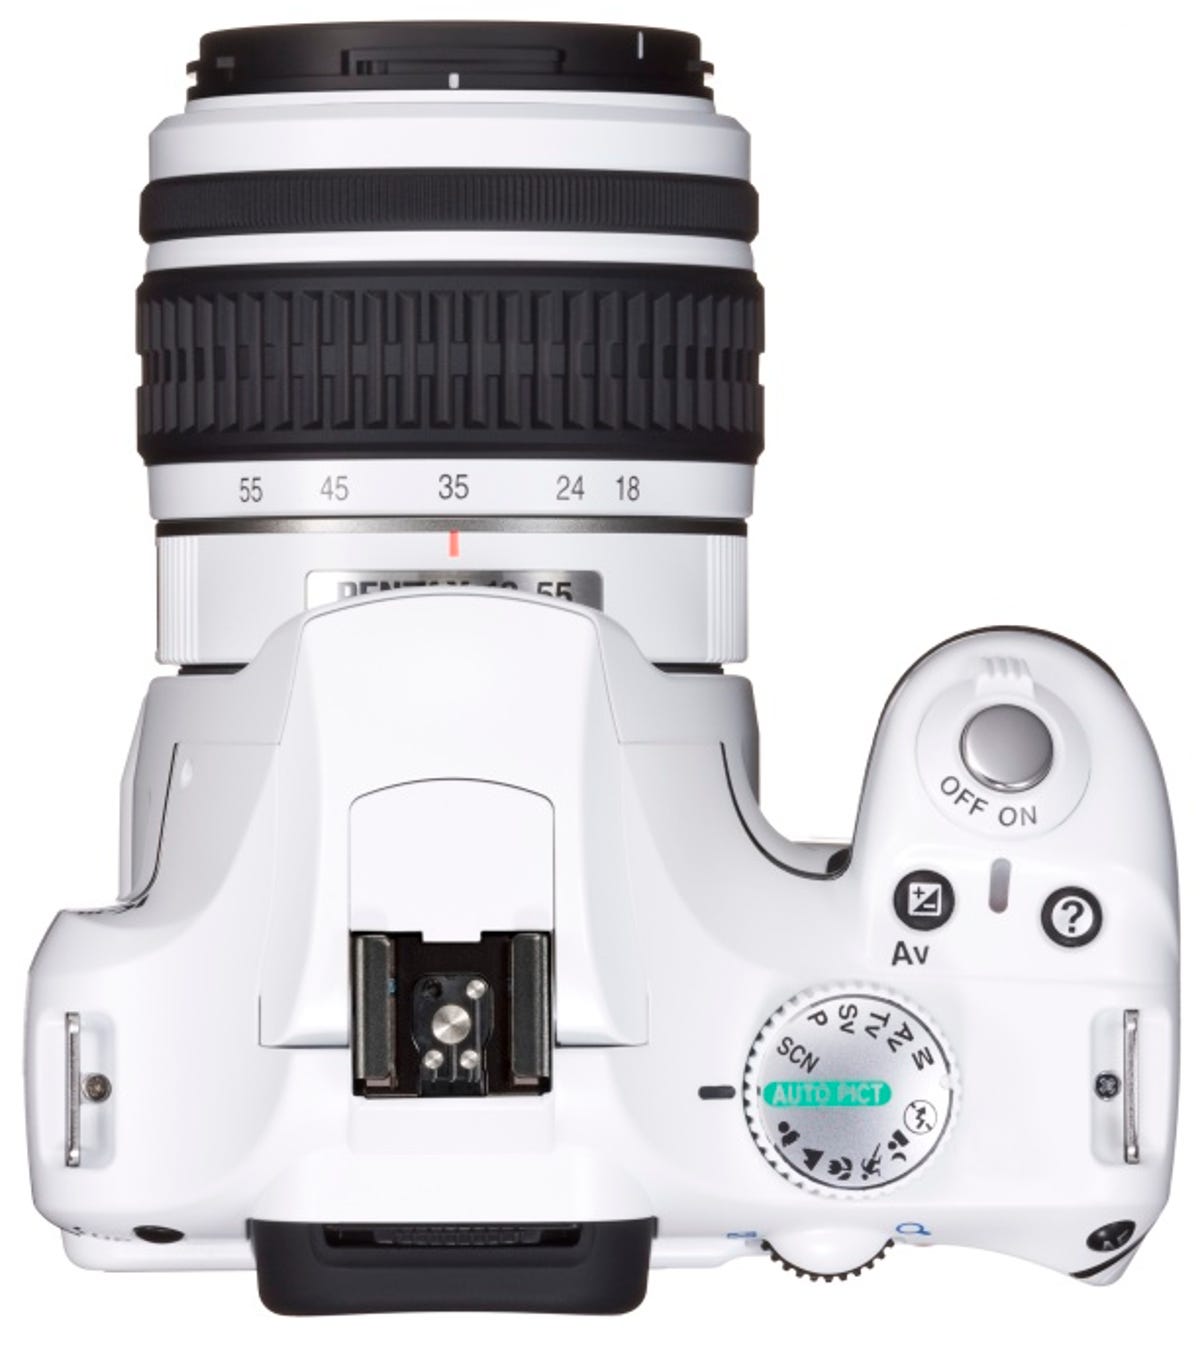 Pentax's limited-edition white K2000.